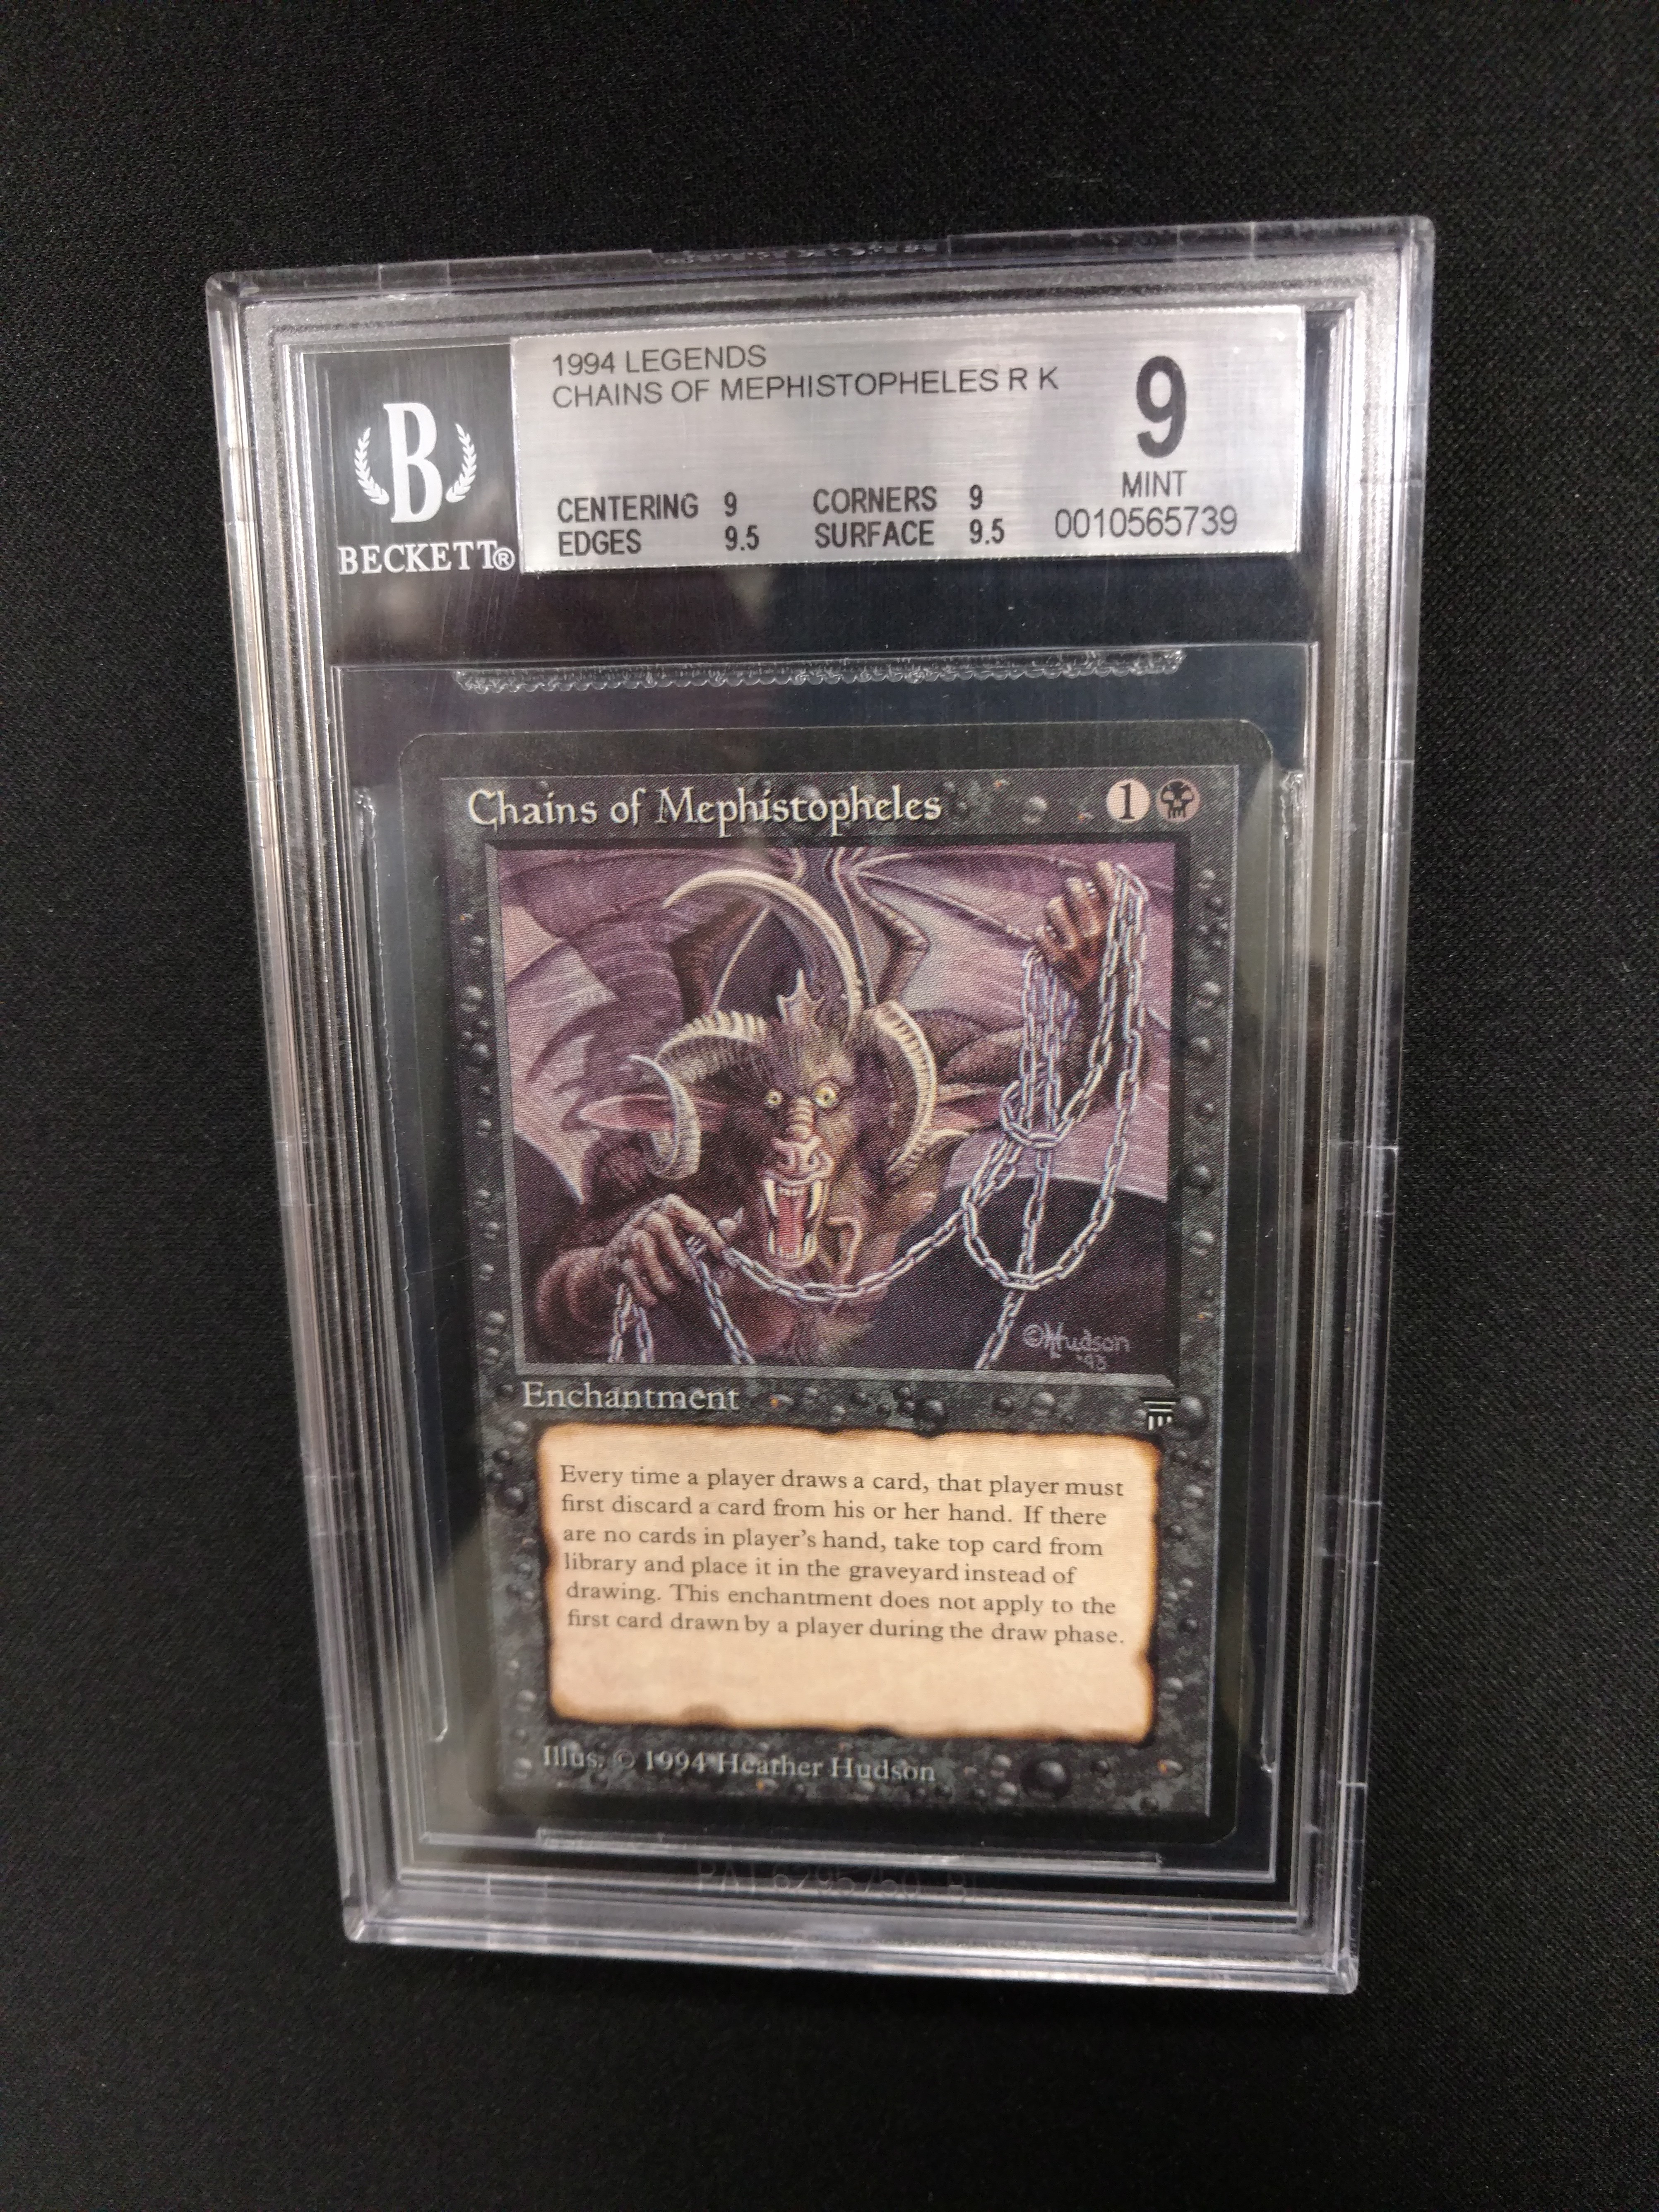 Chains of Mephistopheles BGS 9 MINT Legends MTG Magic Graded Card 